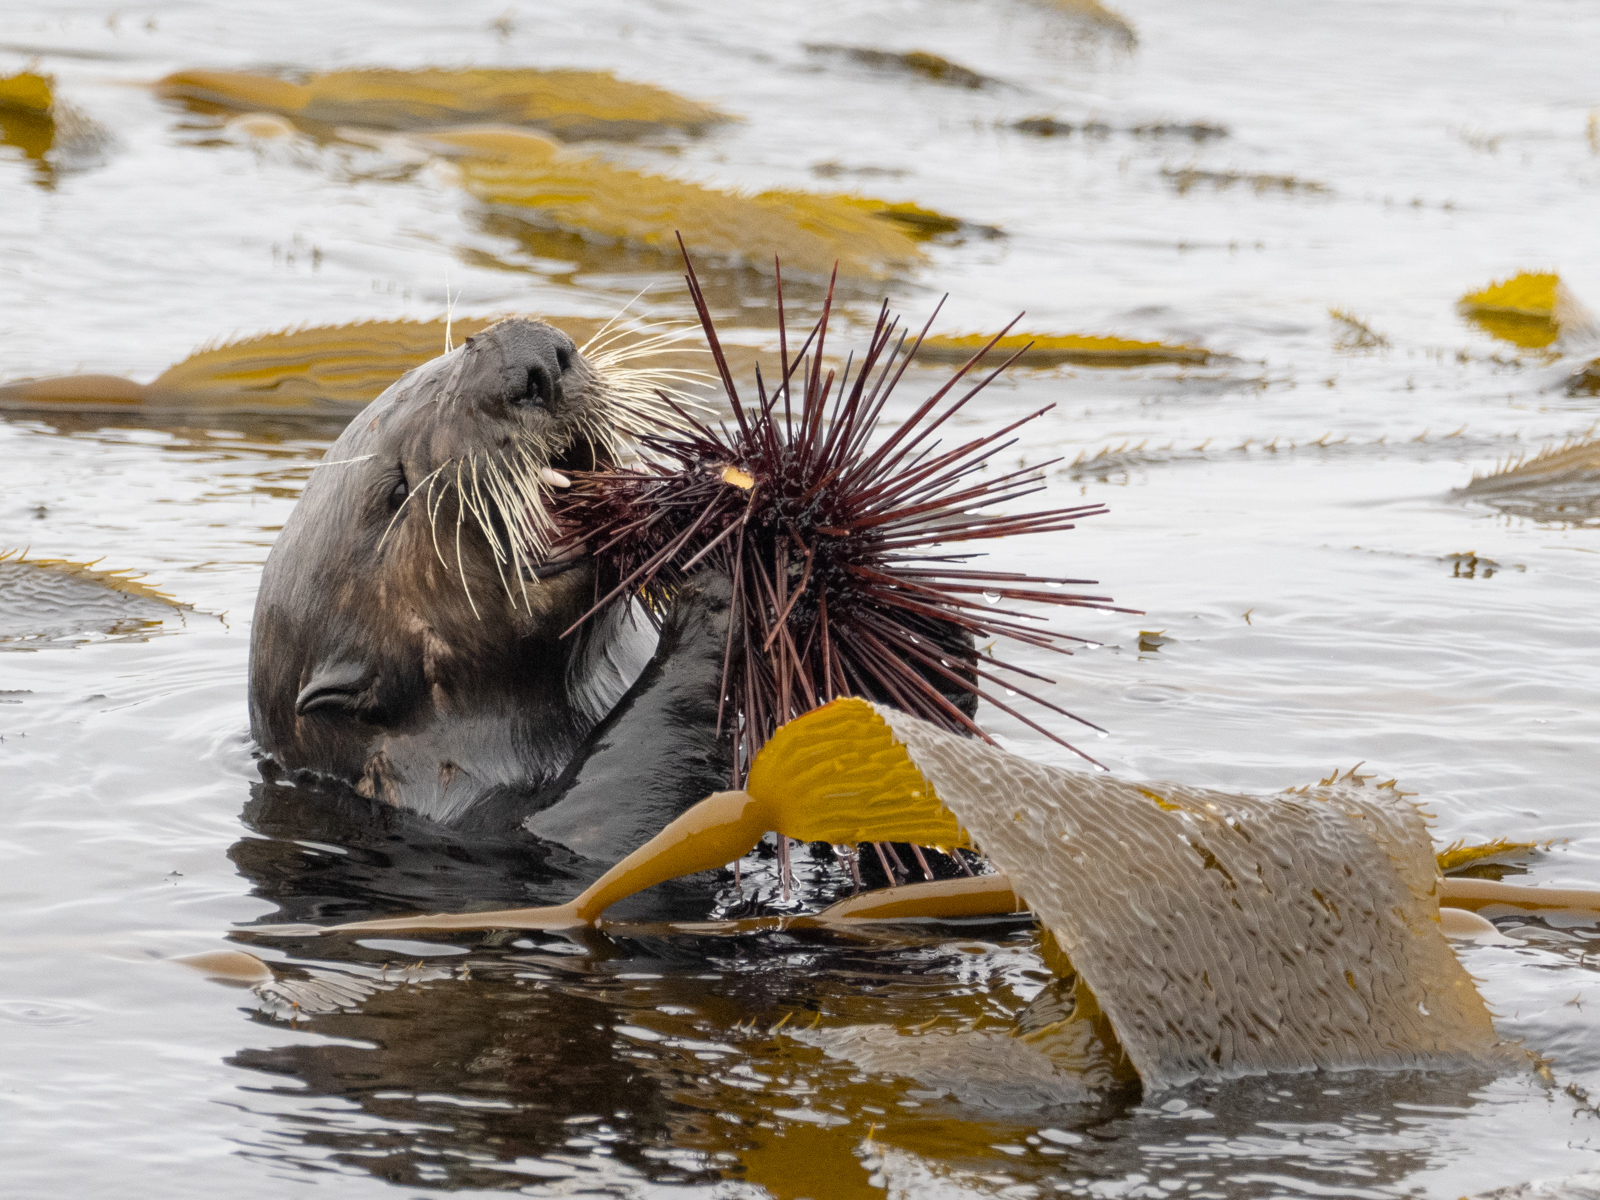 Sea Otter Eating Large Urchin